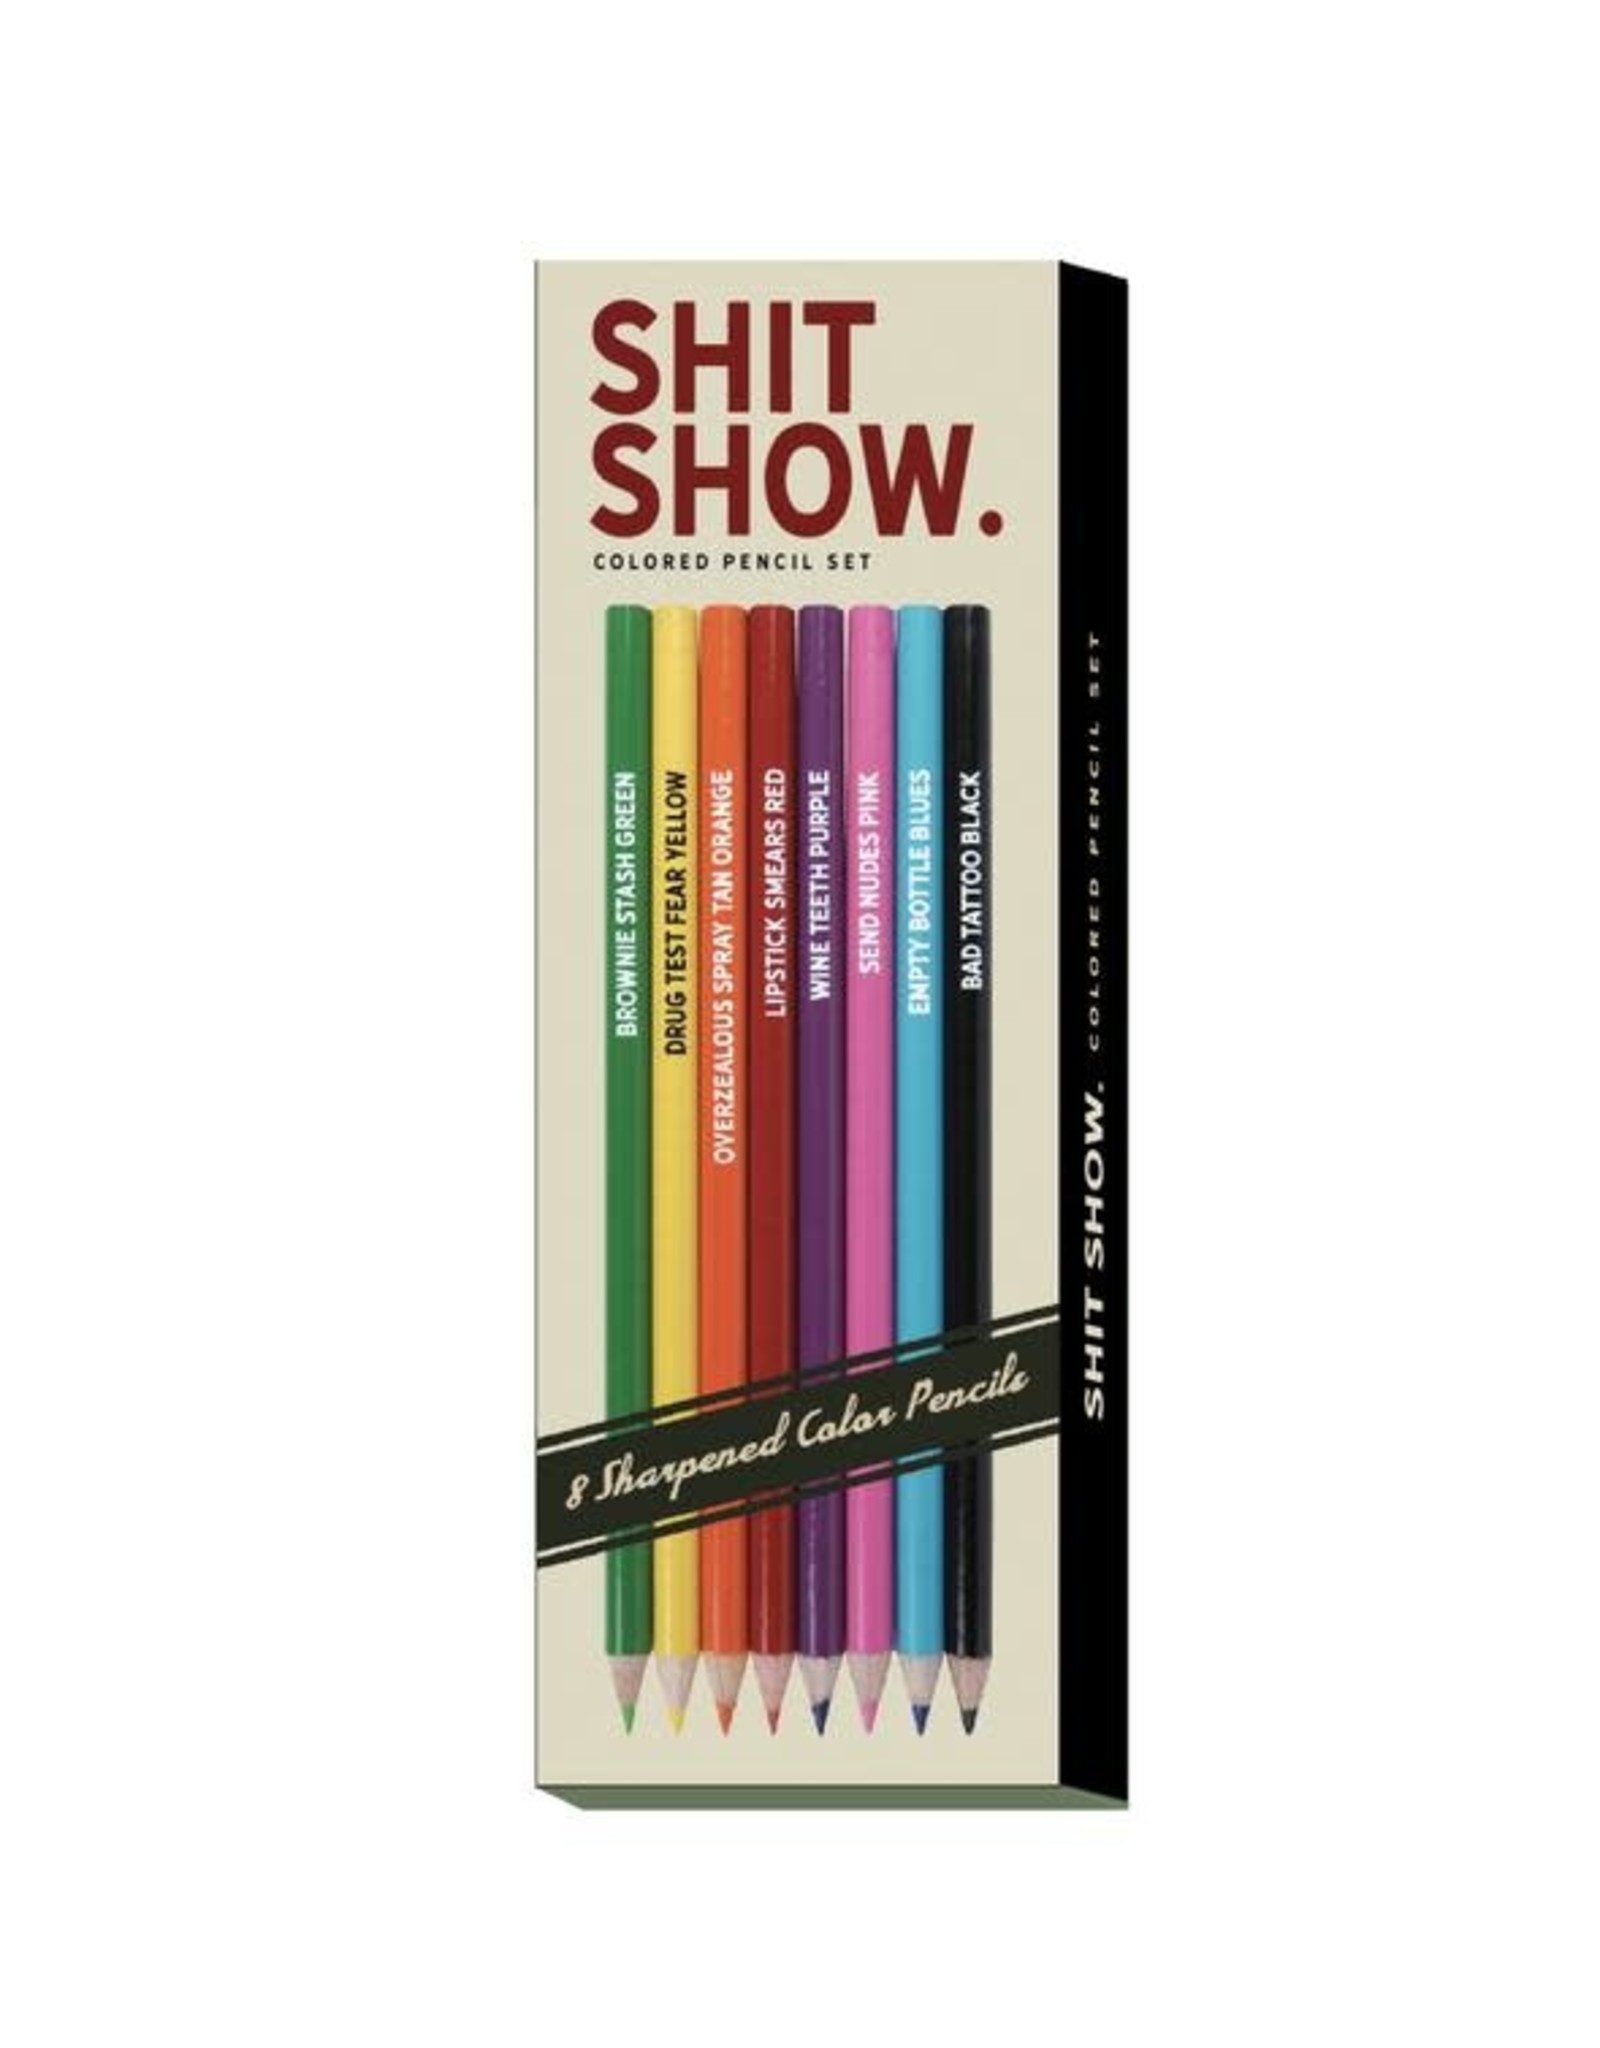 WER - Coloured Pencils / Shit Show 8 pack